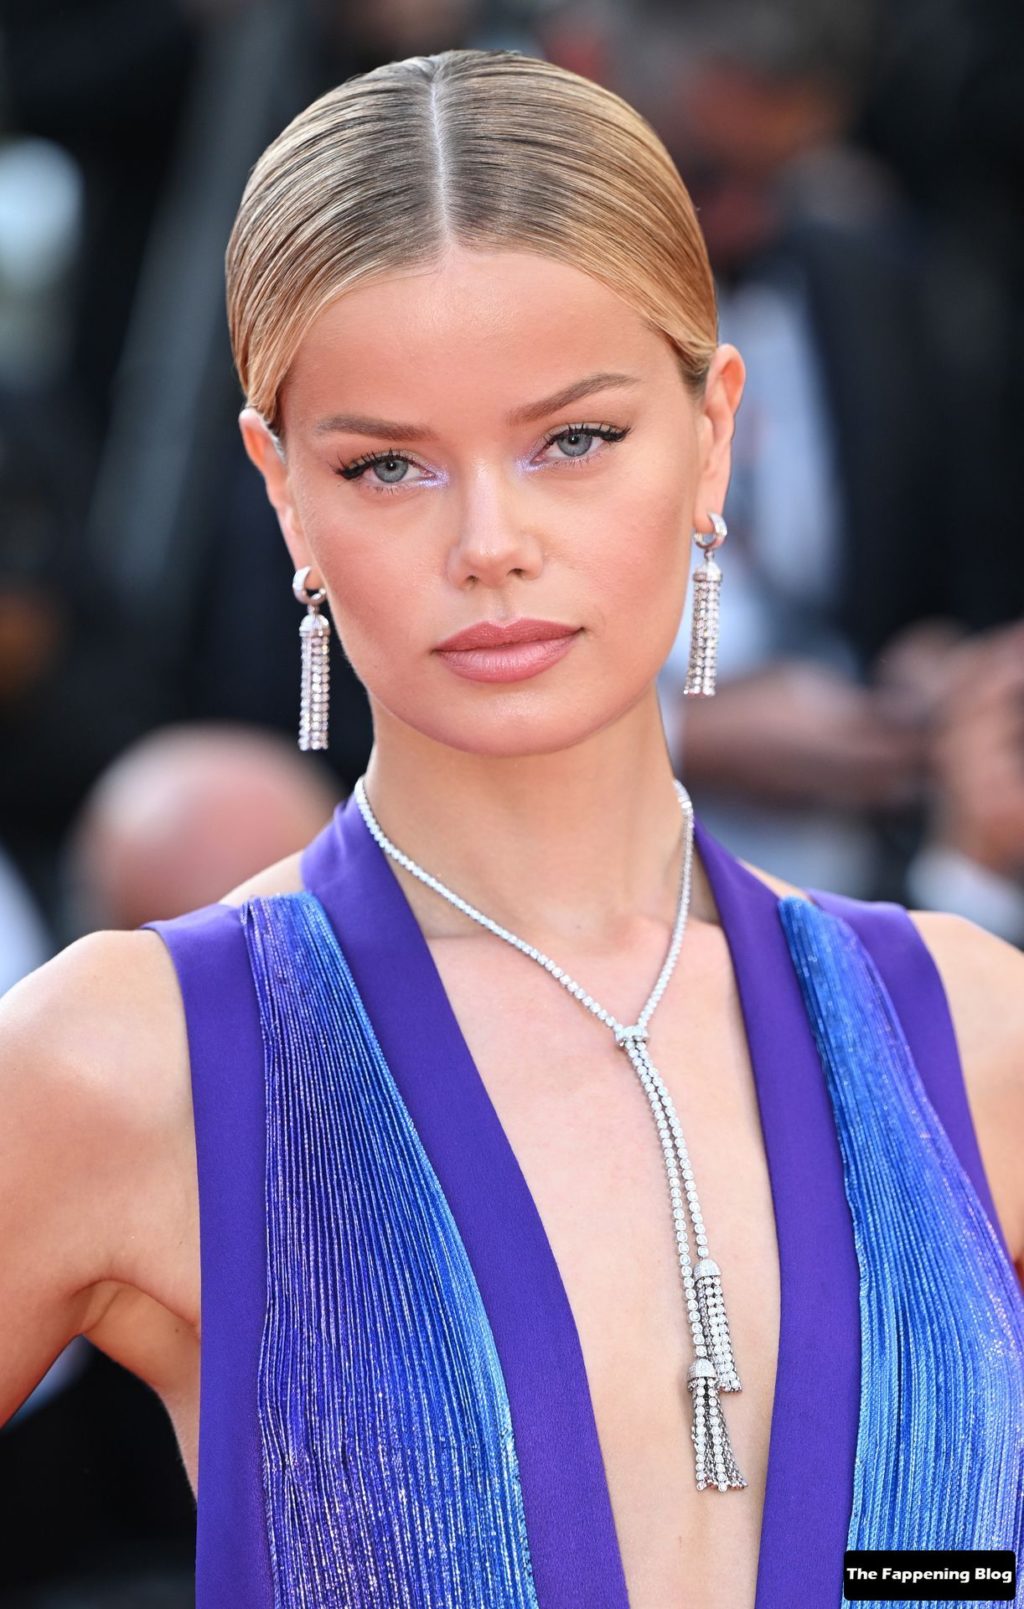 Frida Aasen Sexy The Fappening Blog 37 1 1024x1609 - Frida Aasen Poses on the Red Carpet at the 75th Annual Cannes Film Festival (150 Photos)